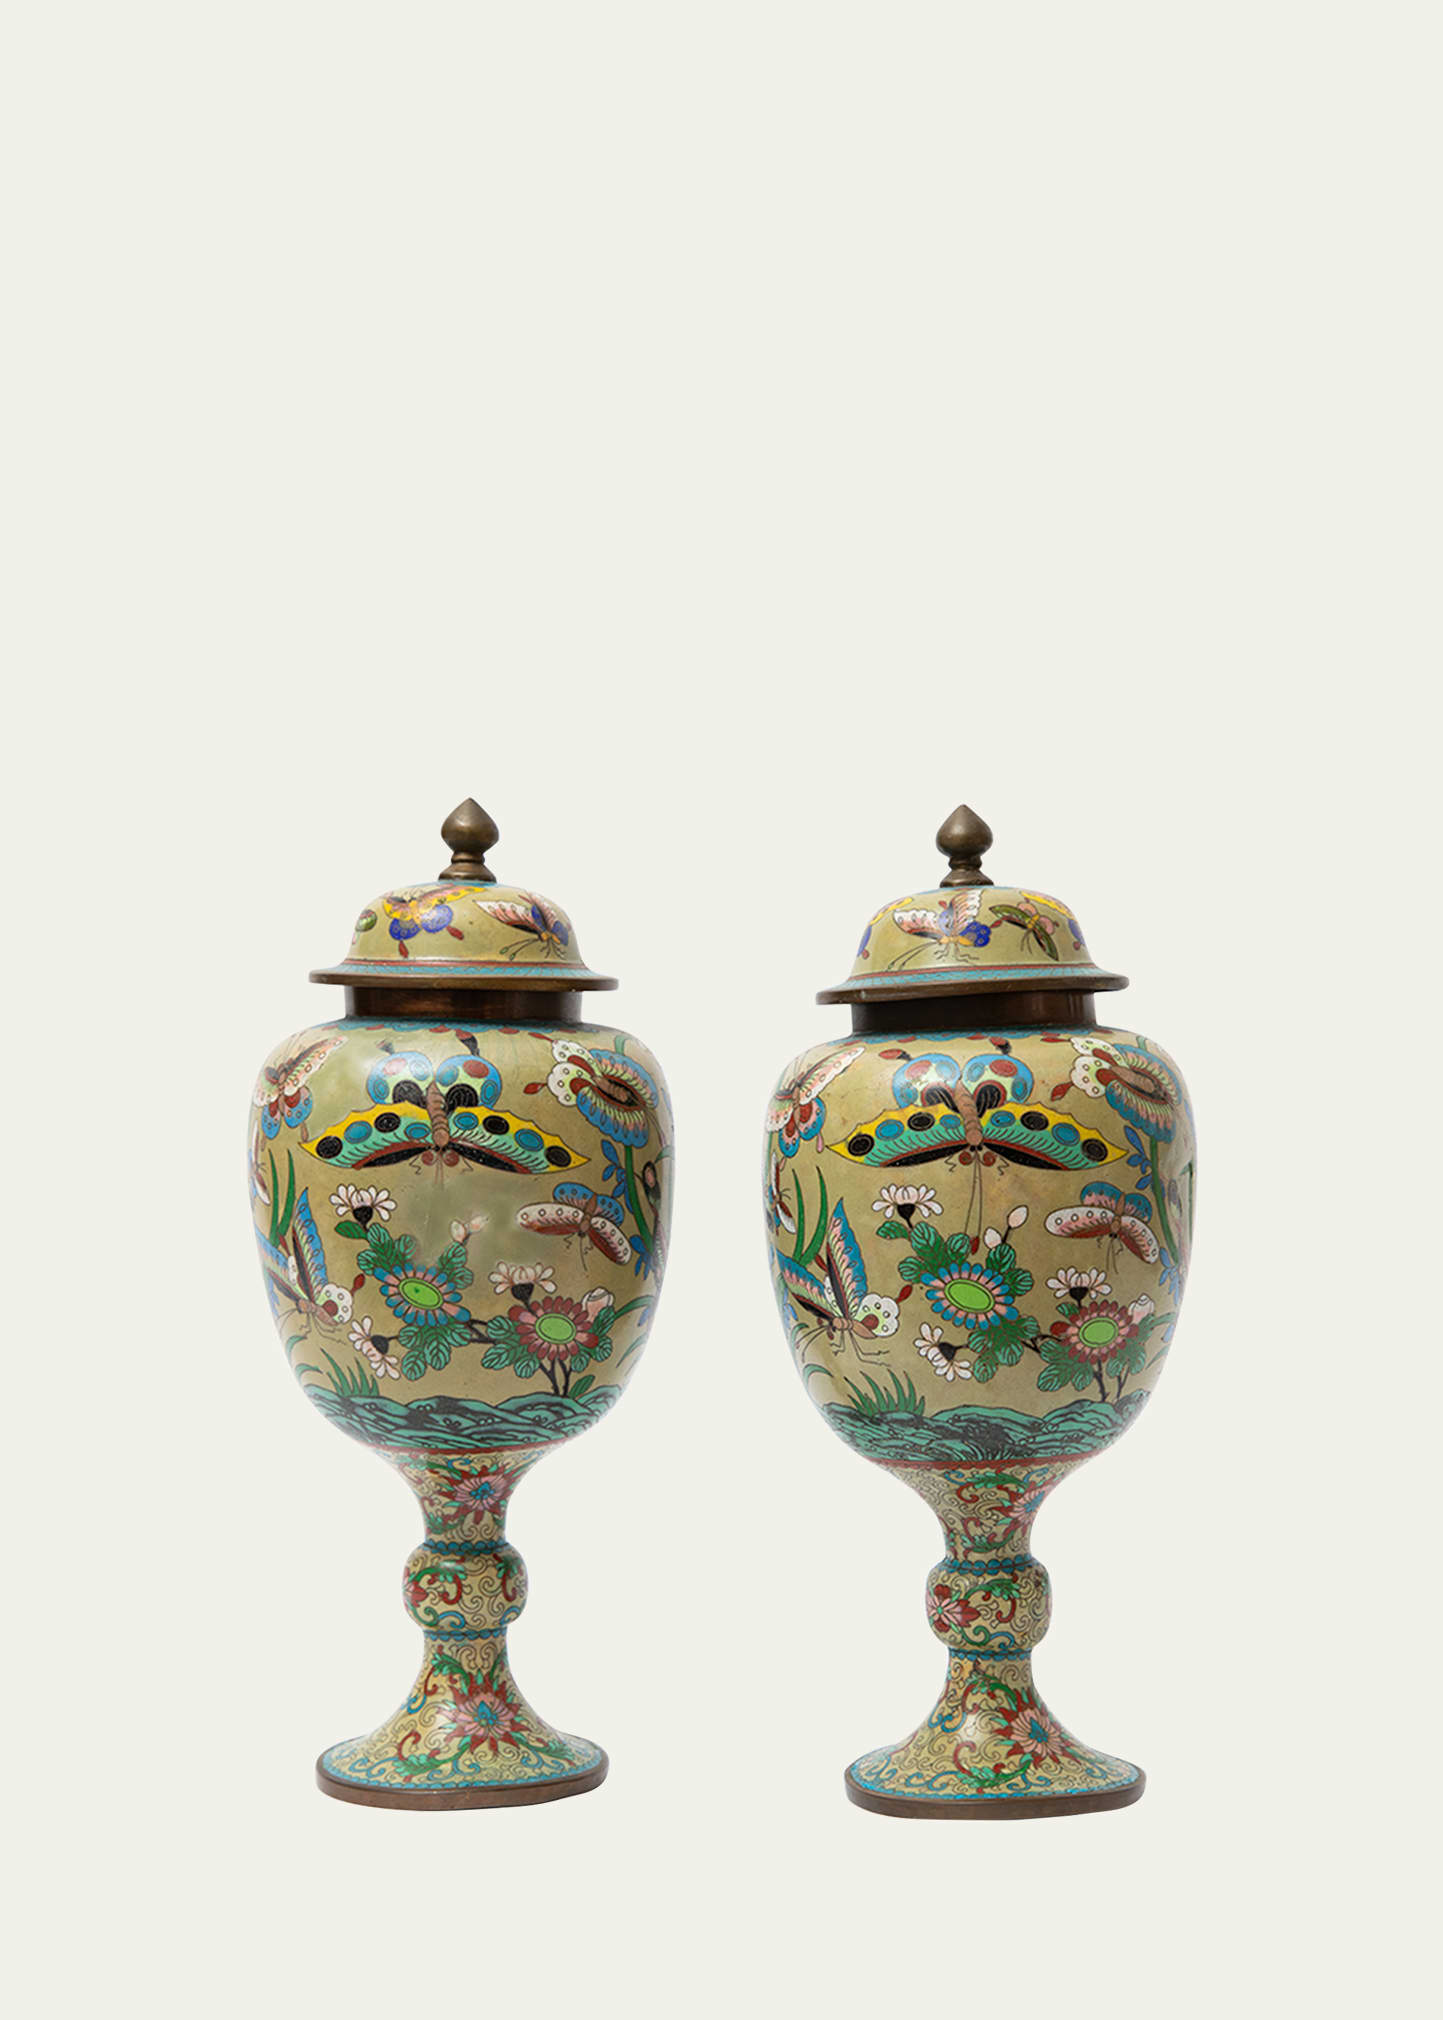 Antique Chinese Cloisonne Covered Urns, Set of 2